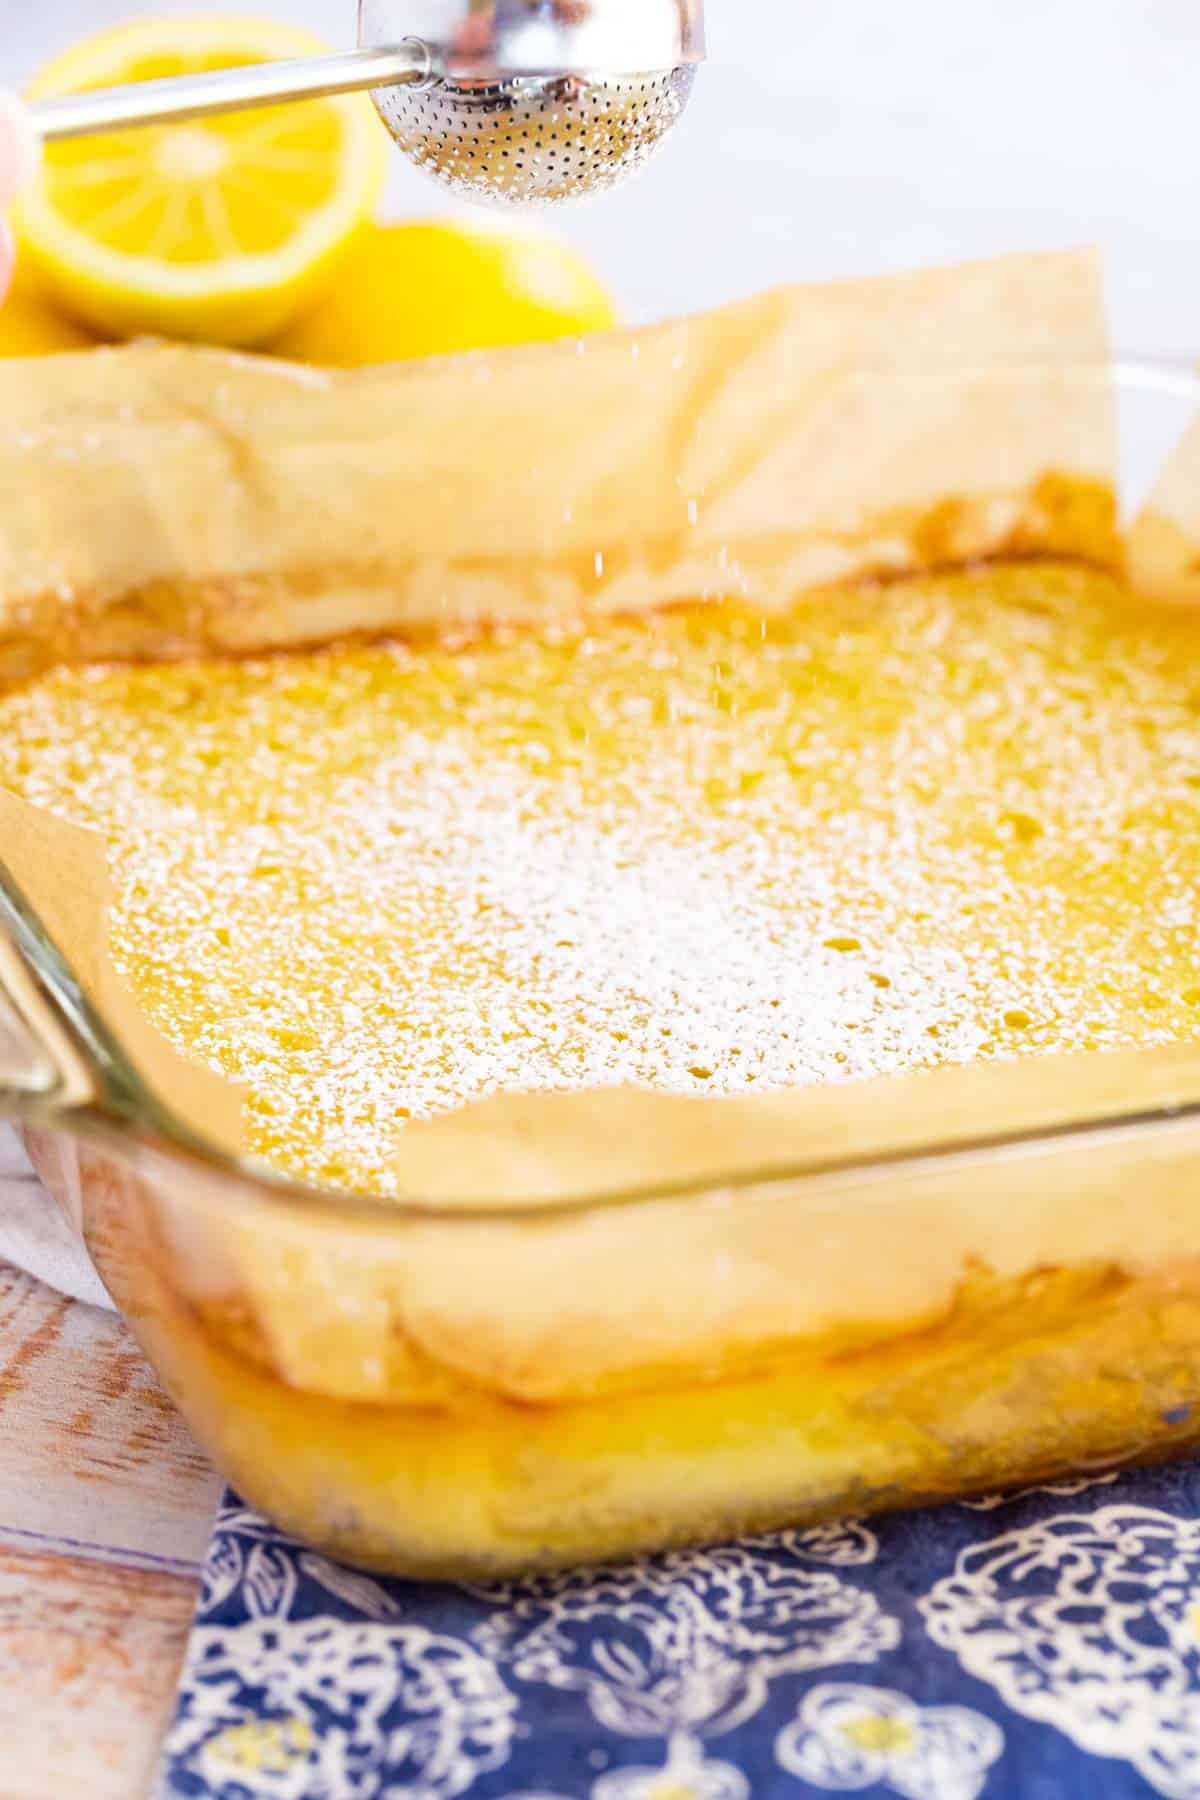 Powdered sugar is dusted over top a baking dish filled with gluten free lemon bars.